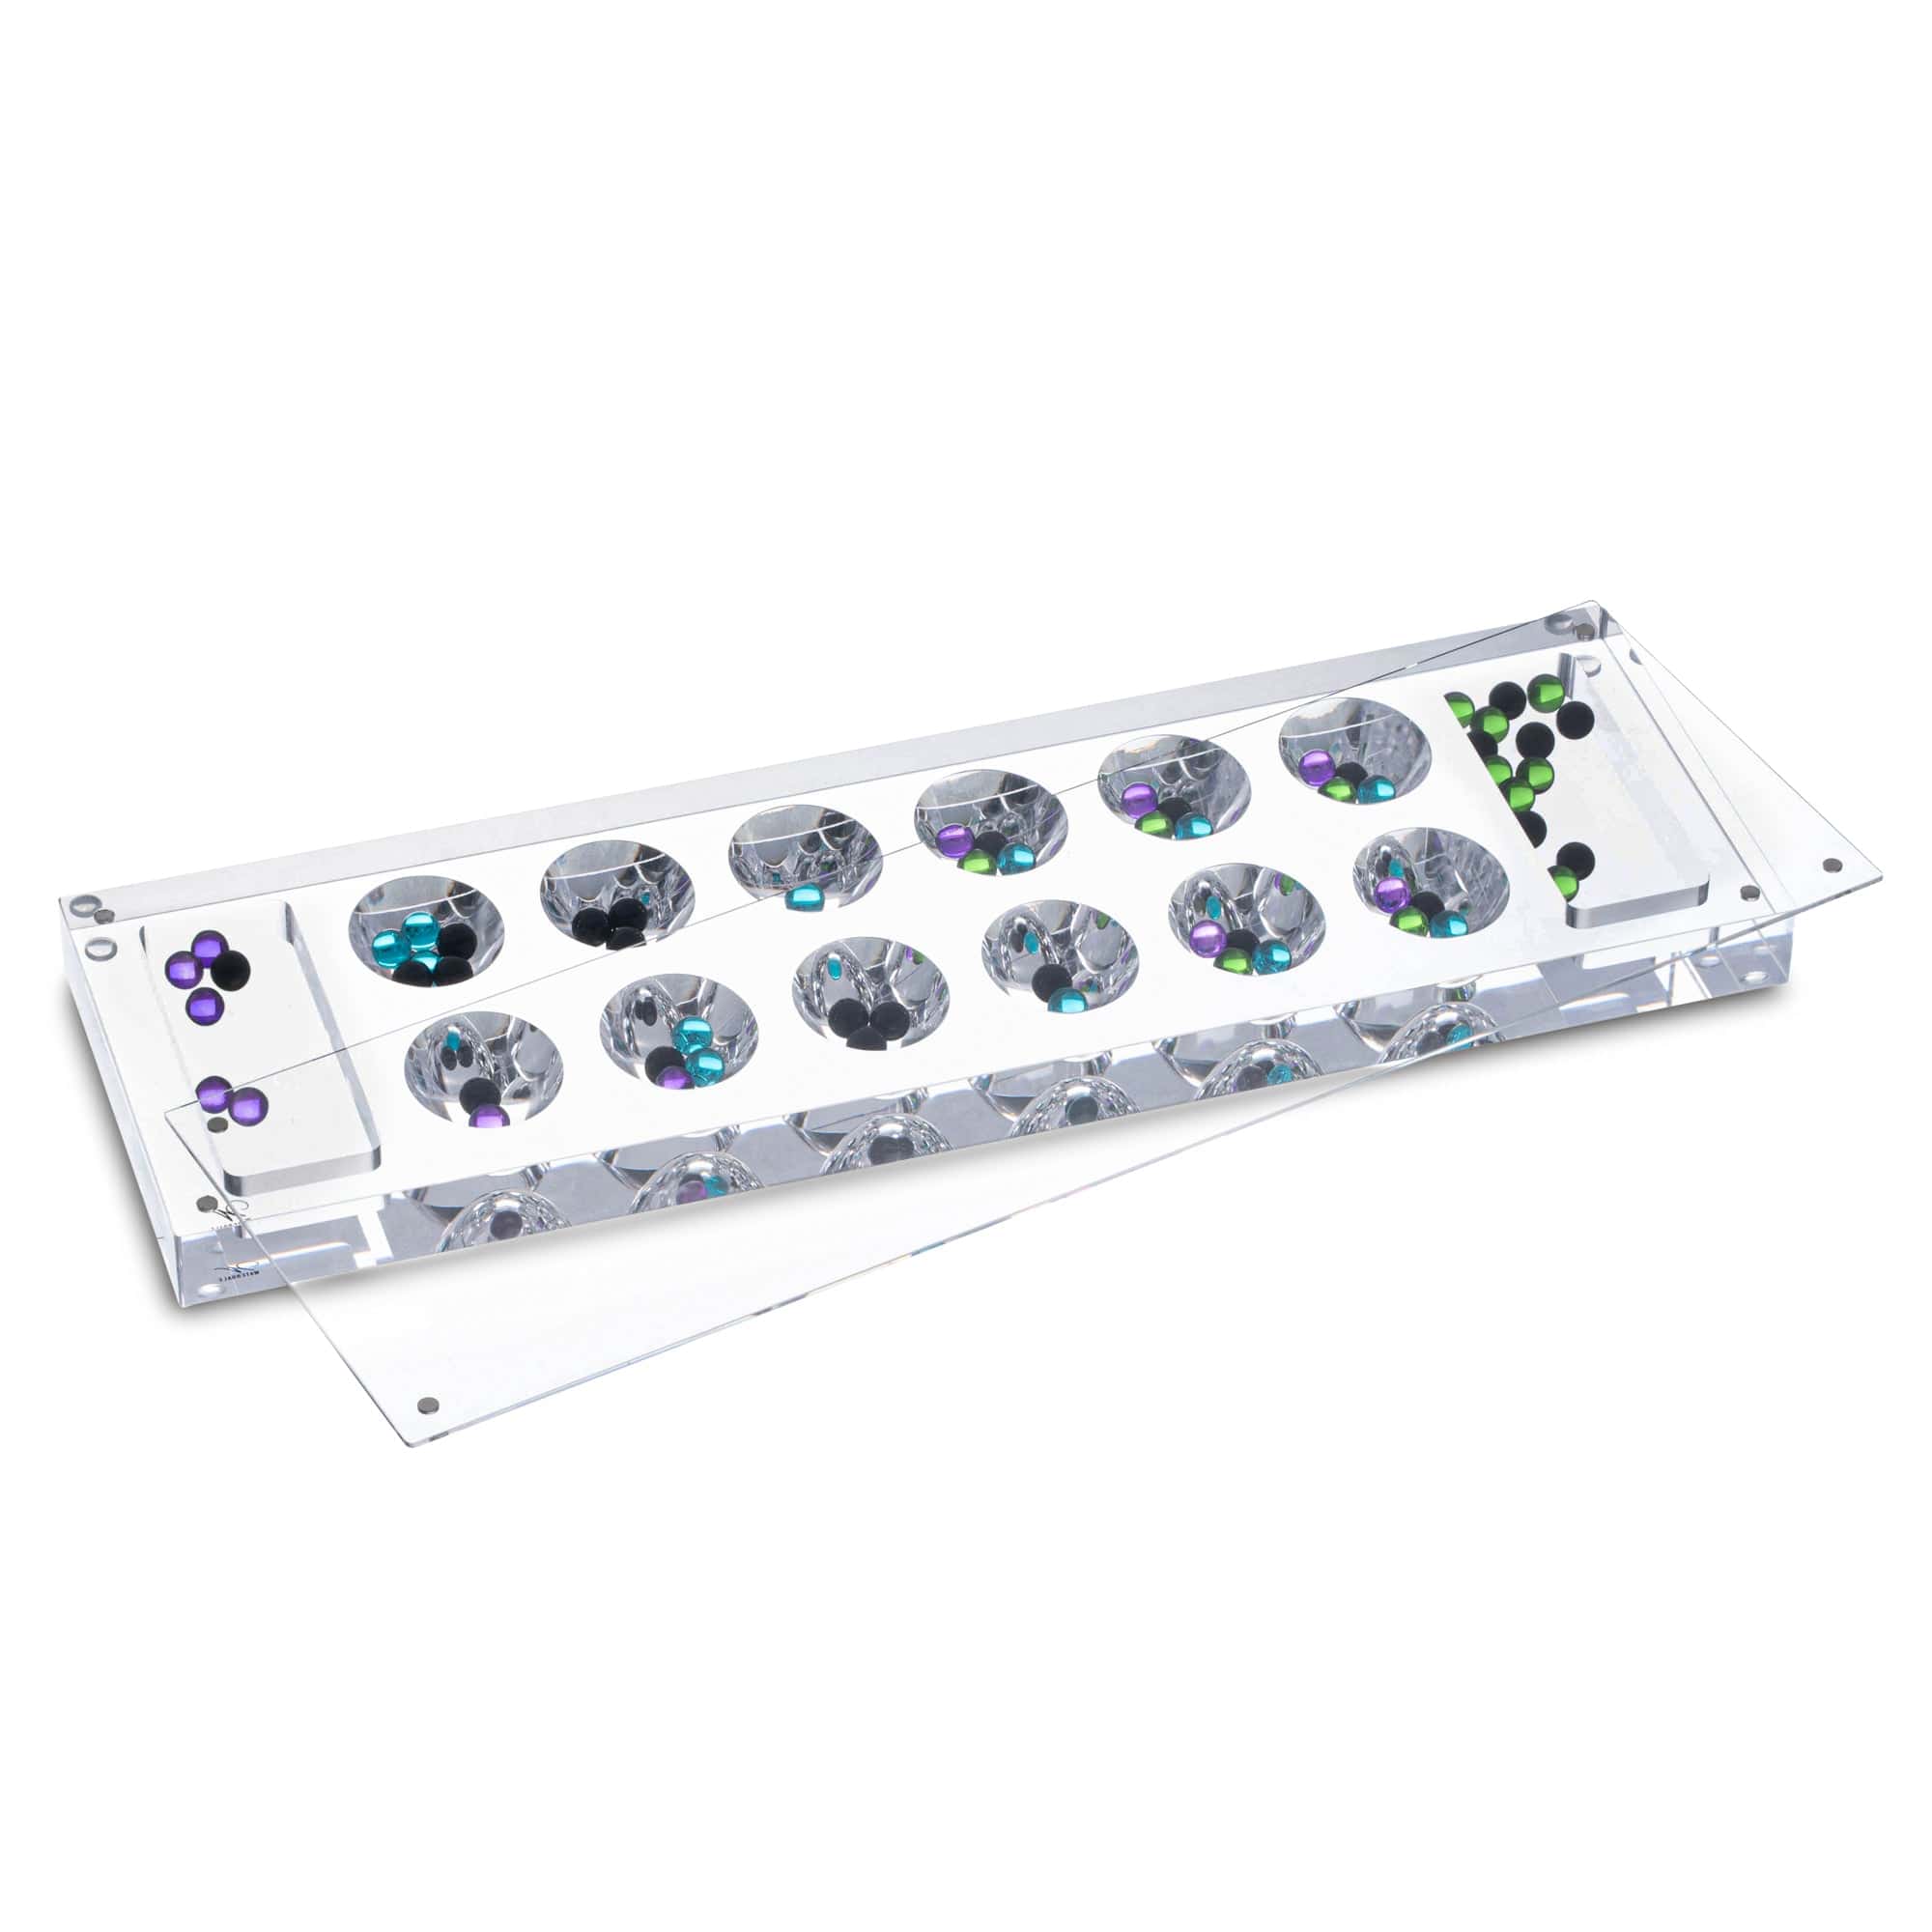 Mancala Game - Waterdale Collection